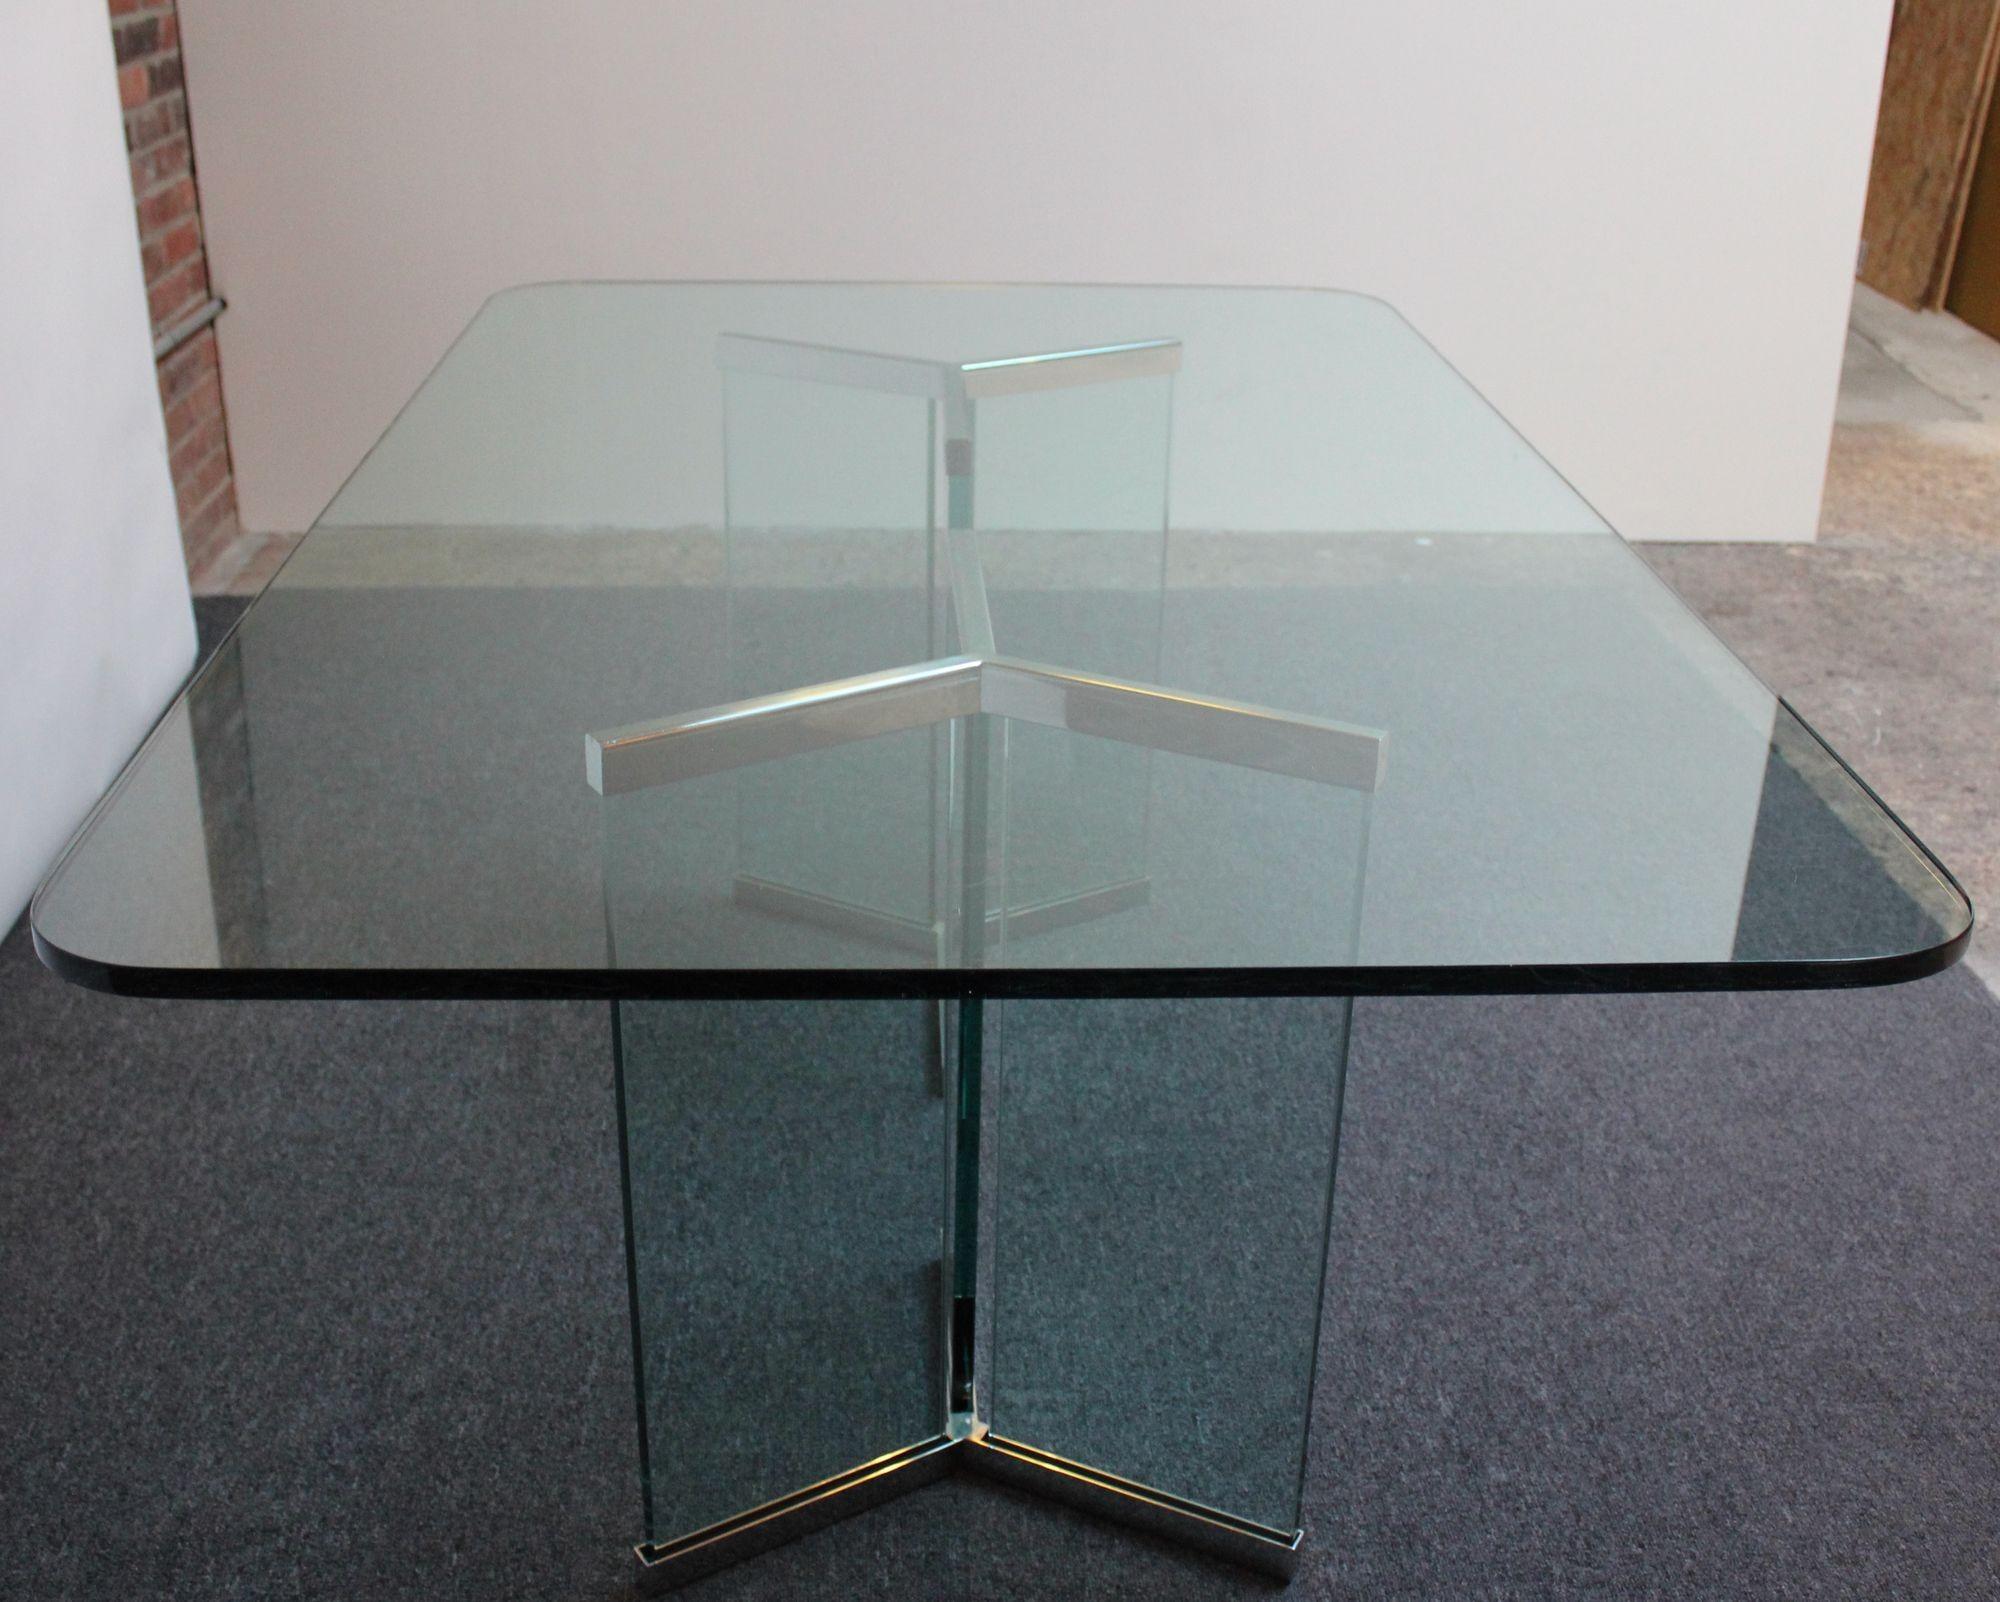 Stylish and sophisticated dining table (model 6060) designed by Leon Rosen for the Pace Collection composed of a heavy plate-glass 72